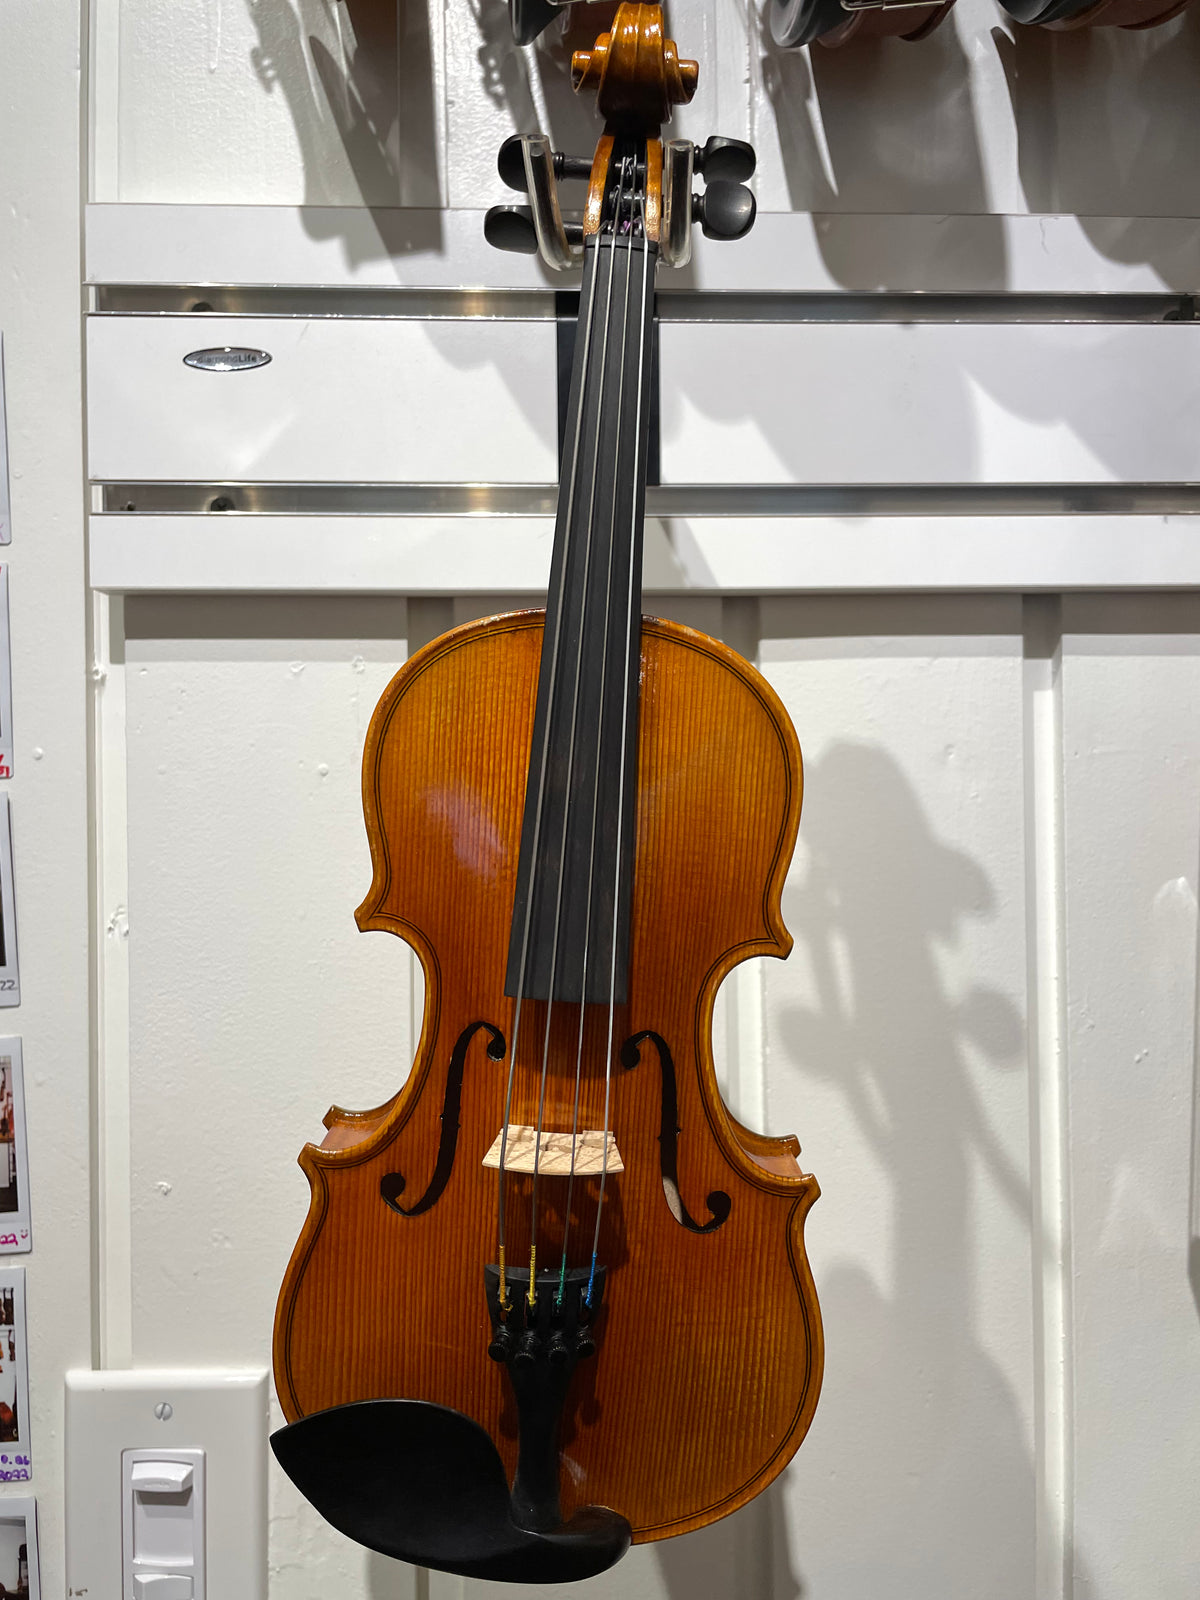 10" Viola Outfit